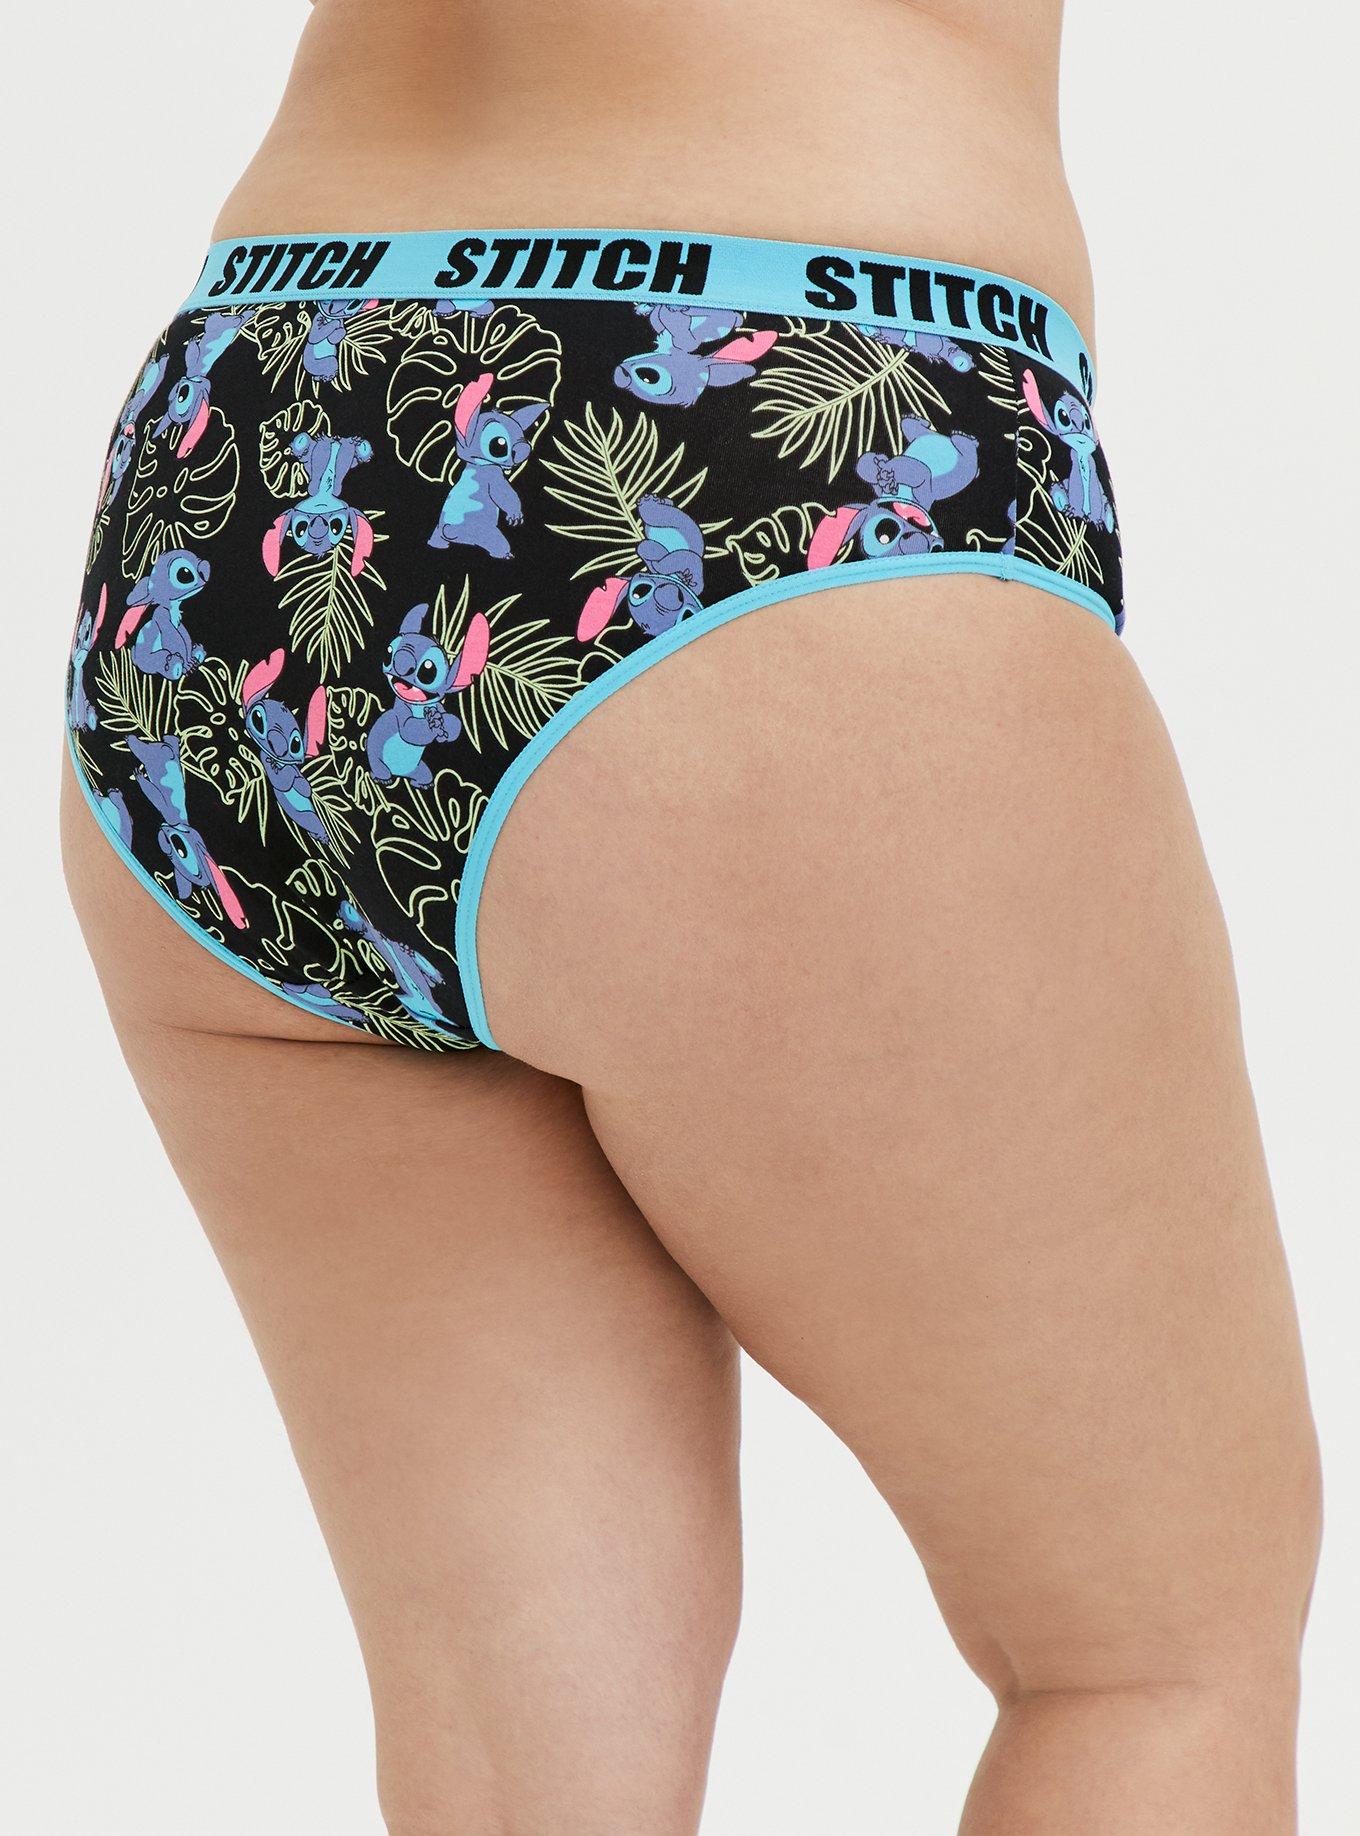 Lilo and Stich Panties